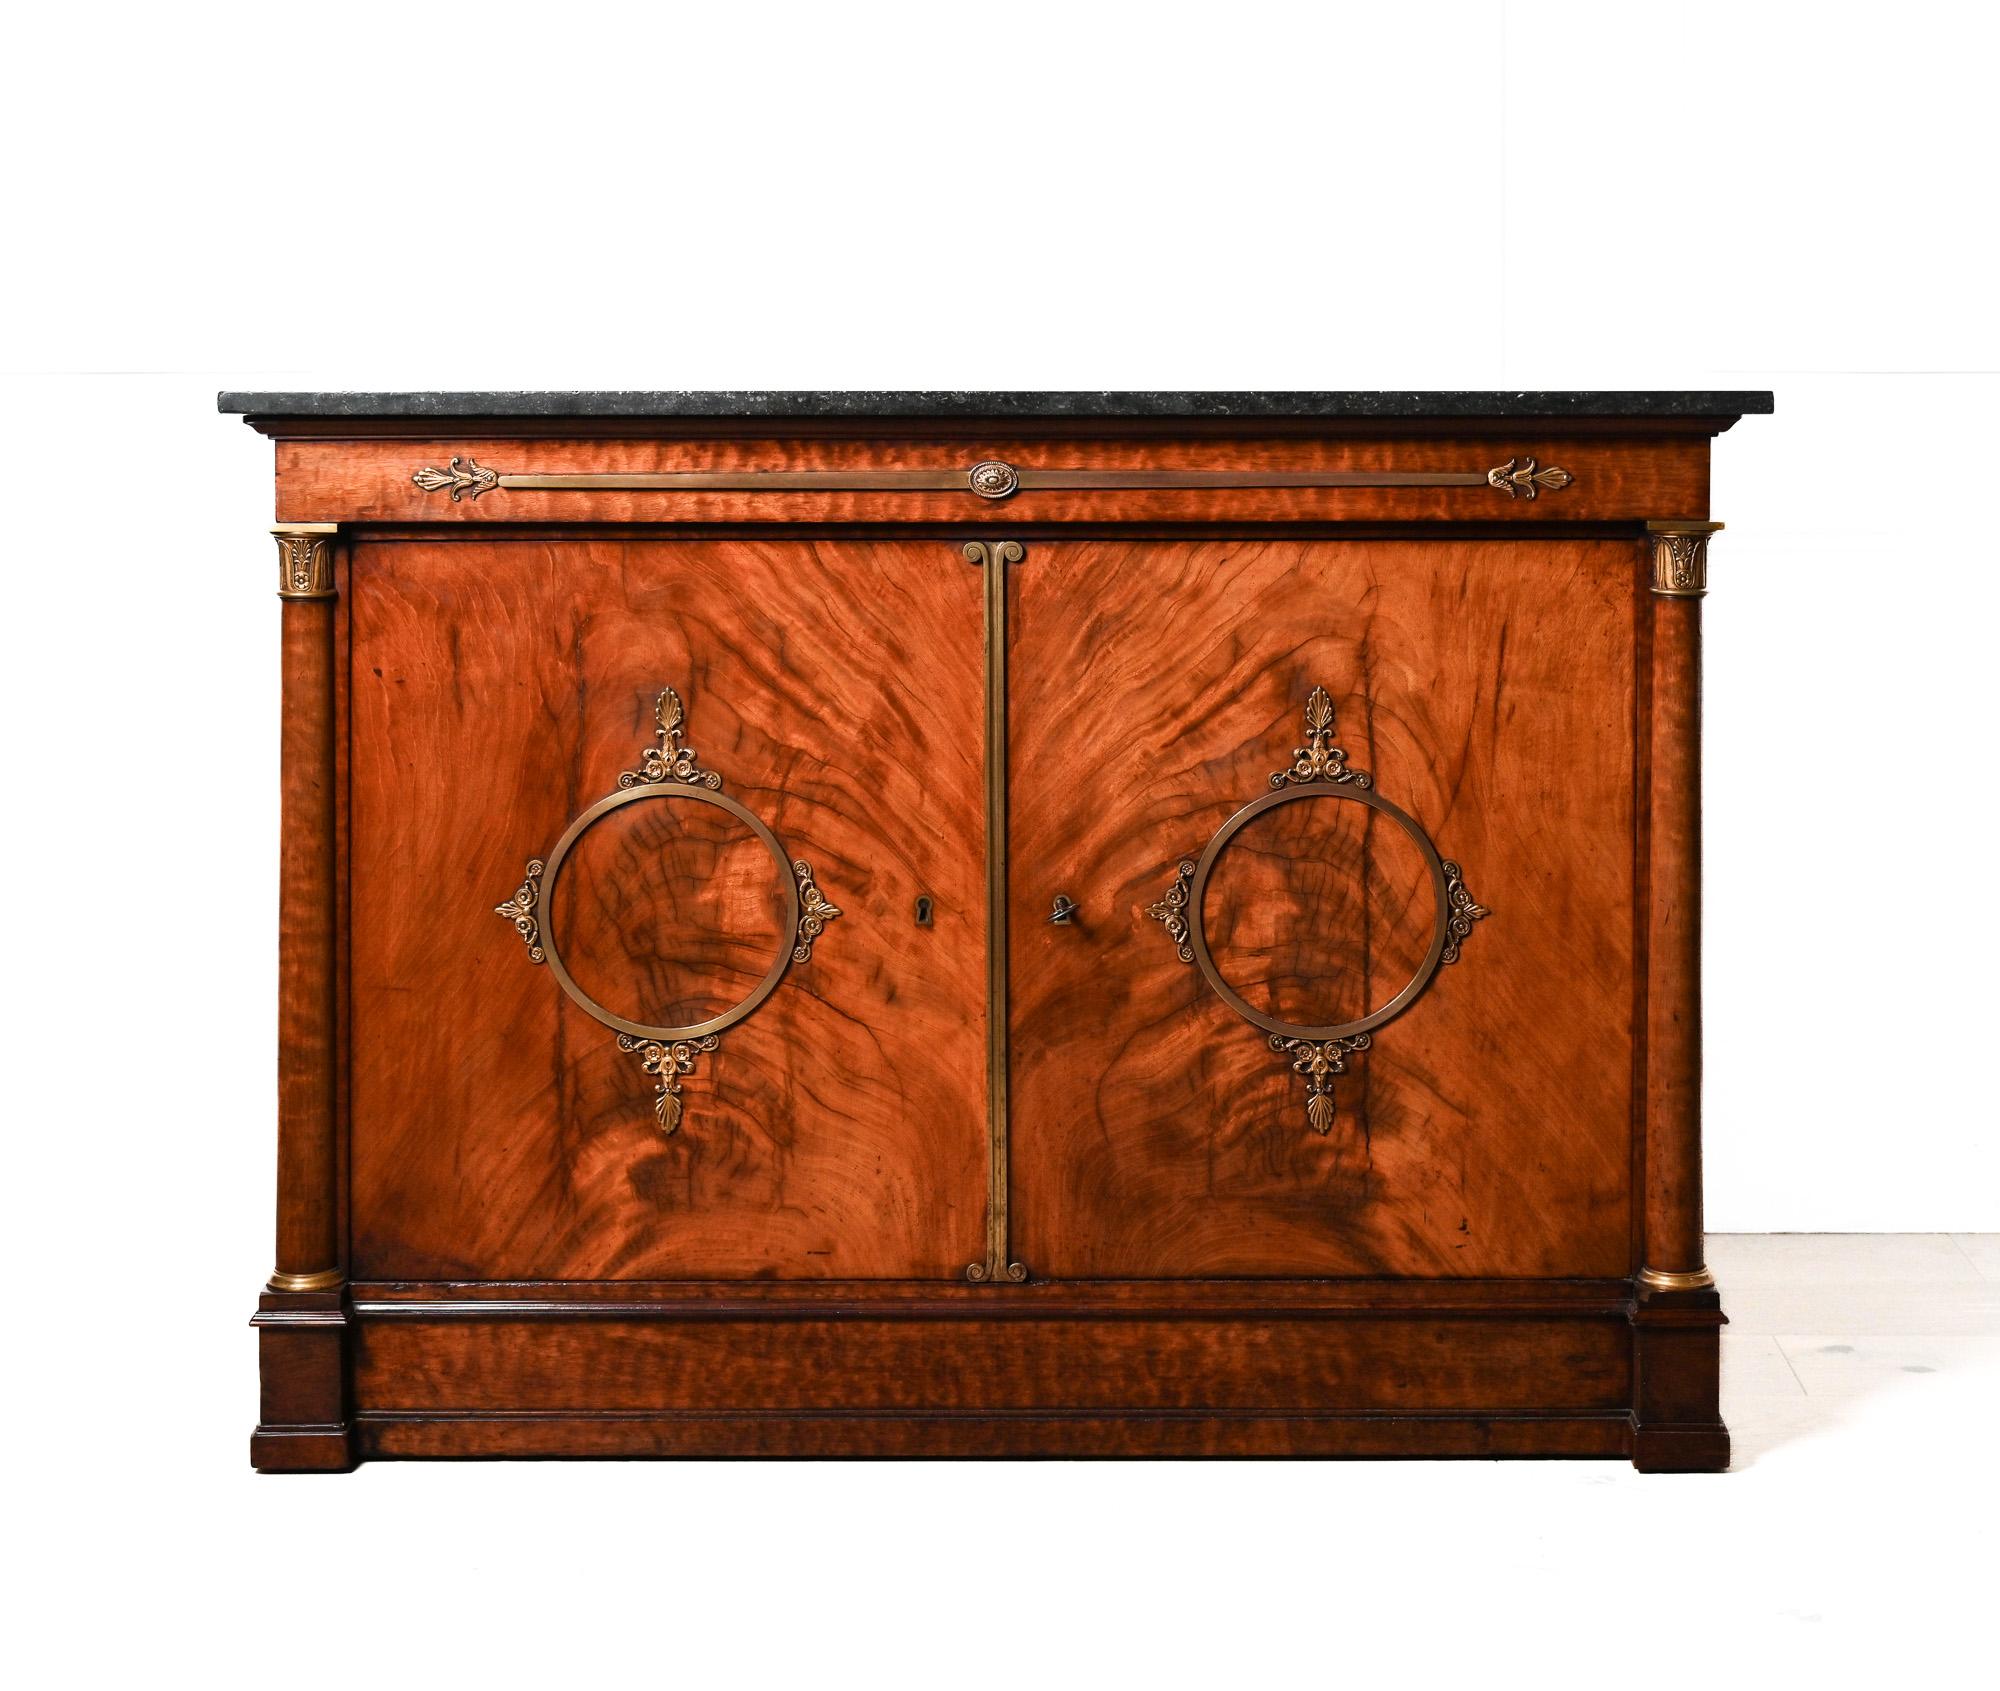 French Empire Jacob Desmalter et Cie mahogany two door commode with marble top For Sale 11